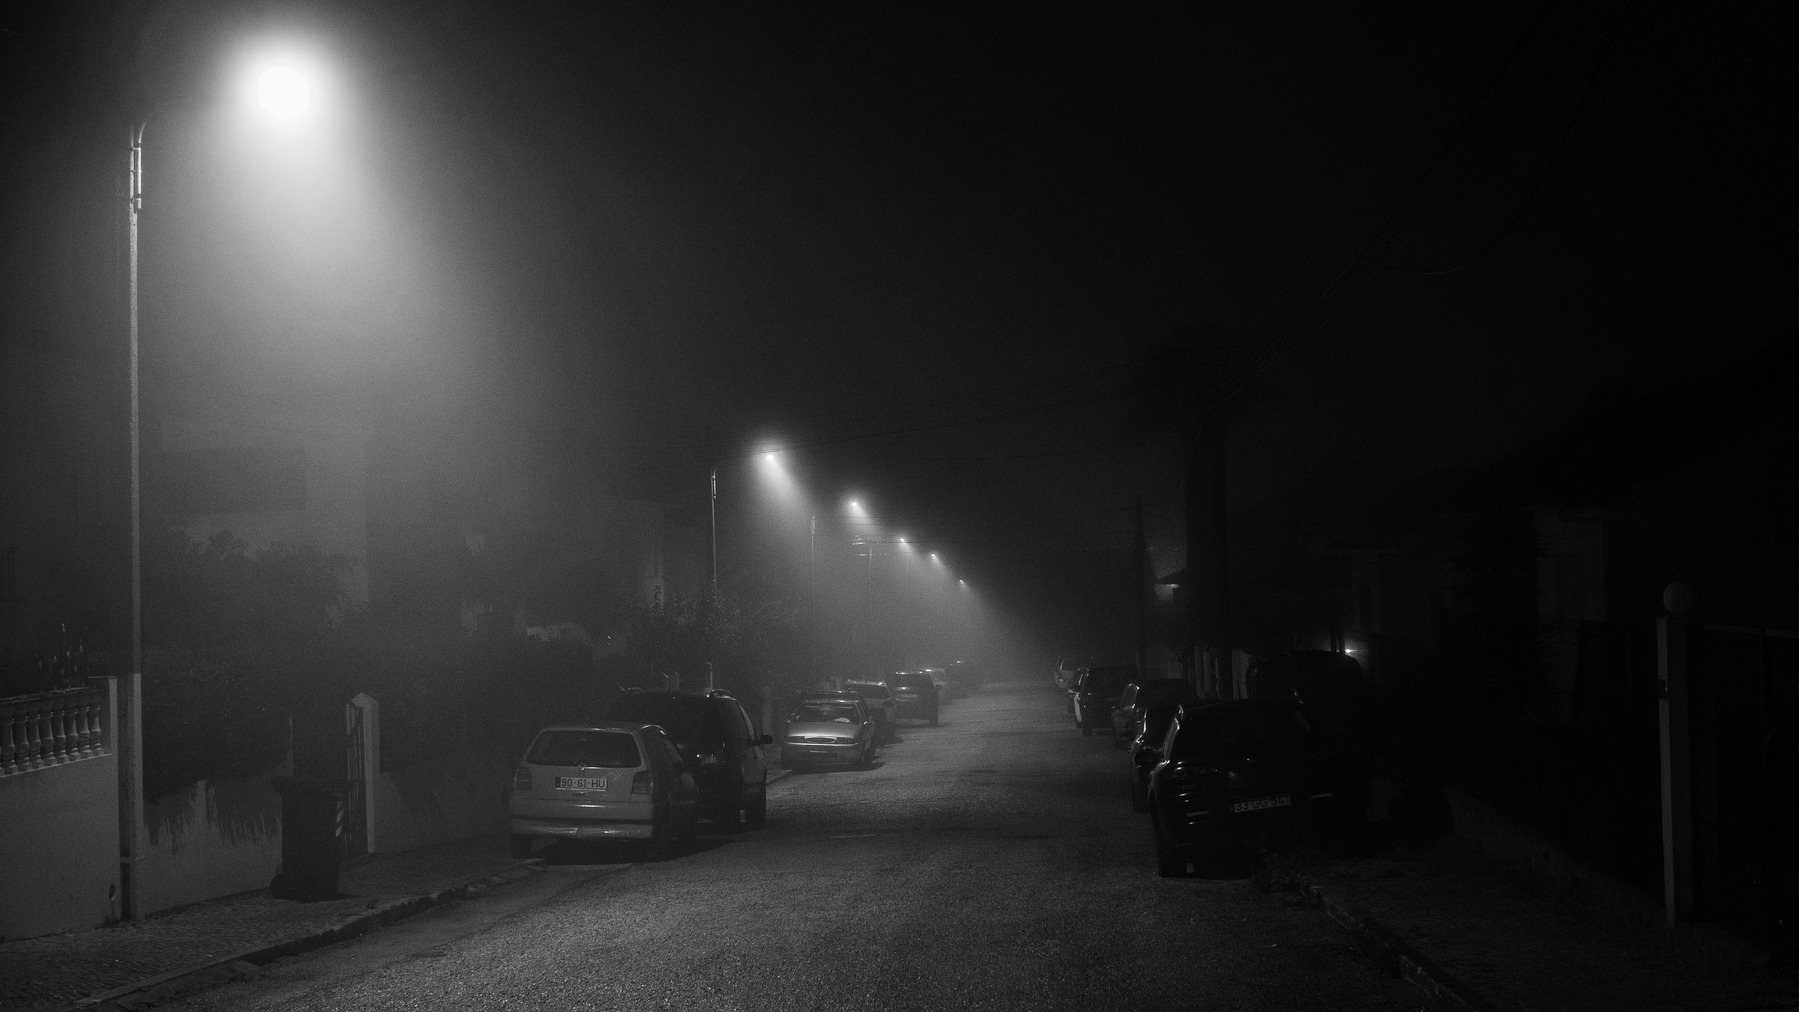 Looking down a residential street, several cars parked on the side of the road. The light from a row of street lamps are diffused through fog.